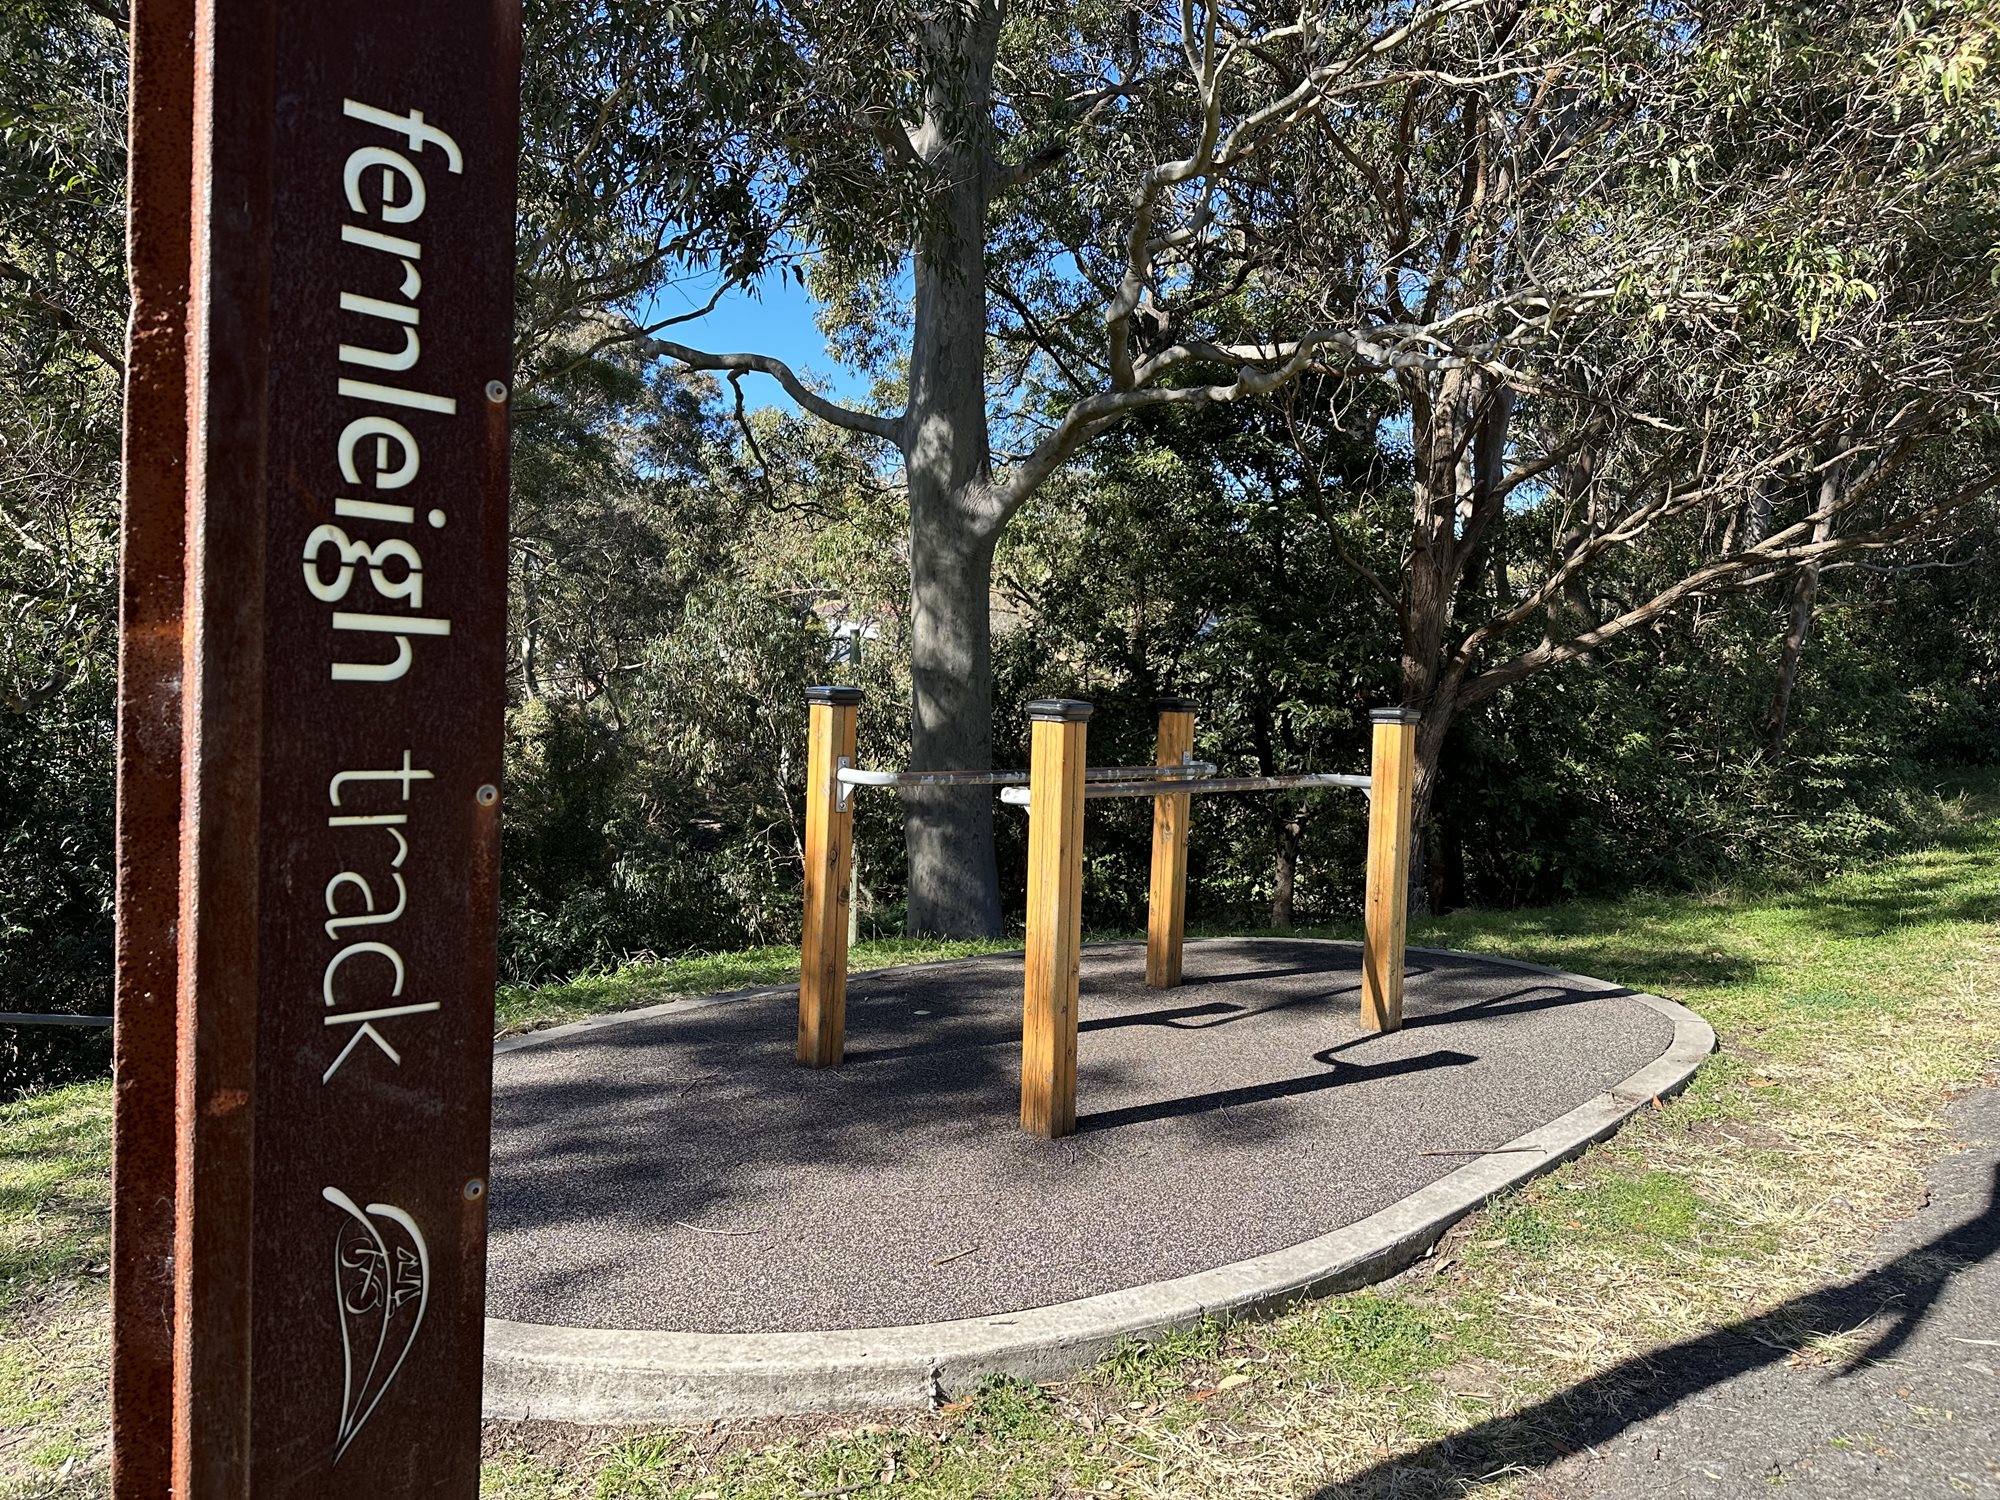 Fernleigh Track fitness stations